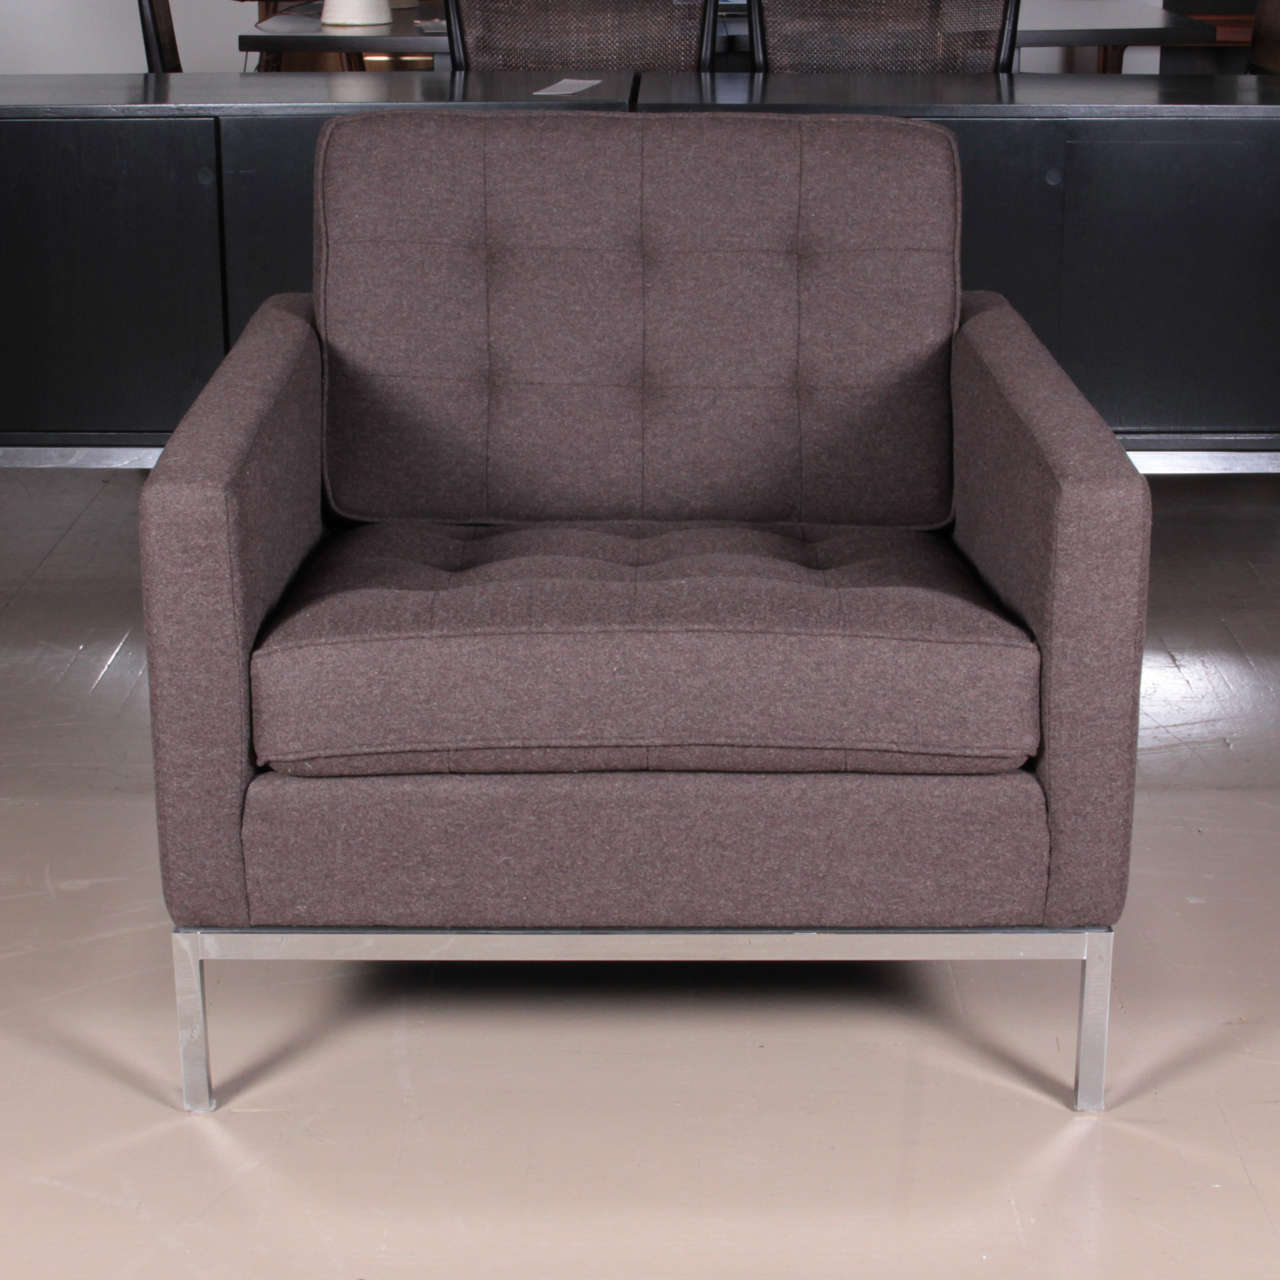 Florence Knoll classic club chair, reupholstered in brown felt, on chrome frame.